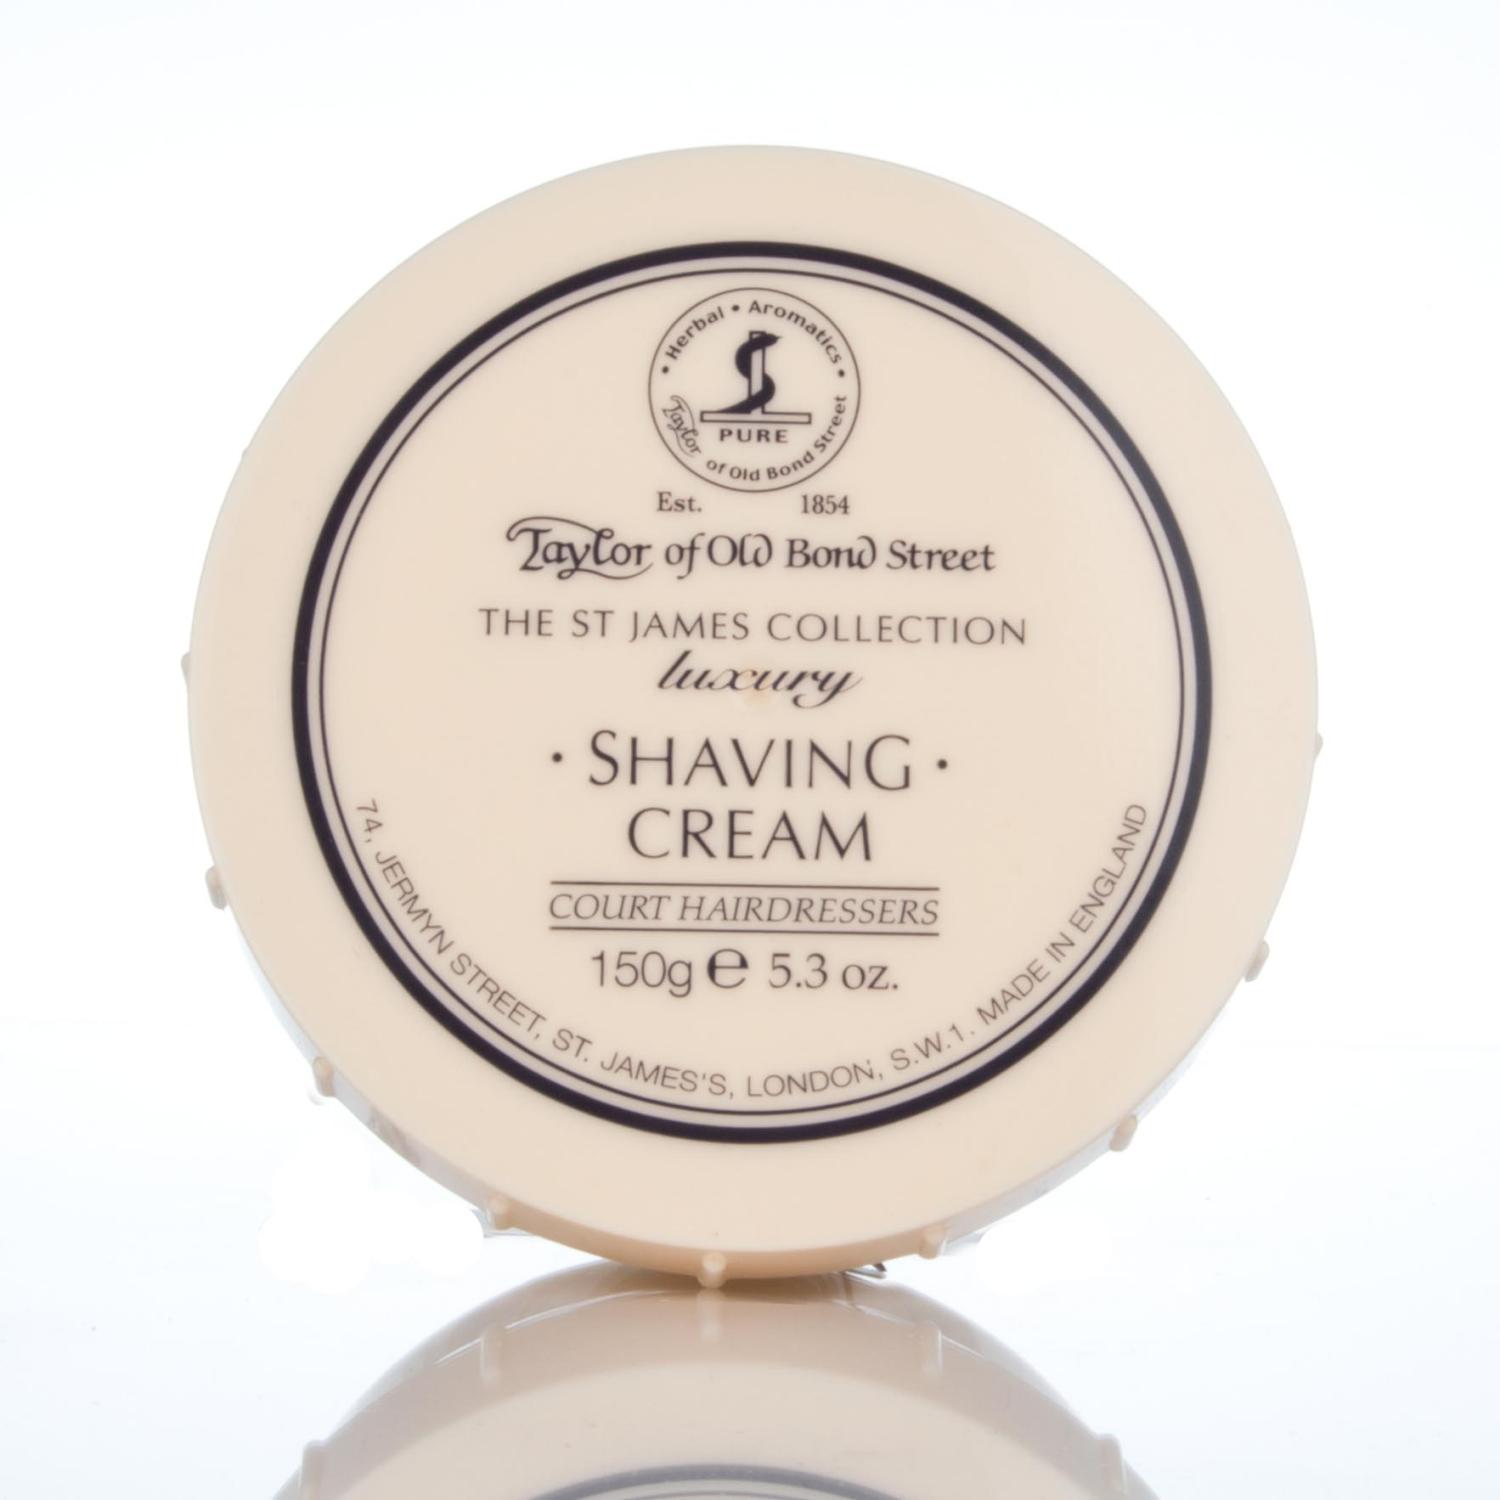 Shaving luxury Cream Taylor Collection St James